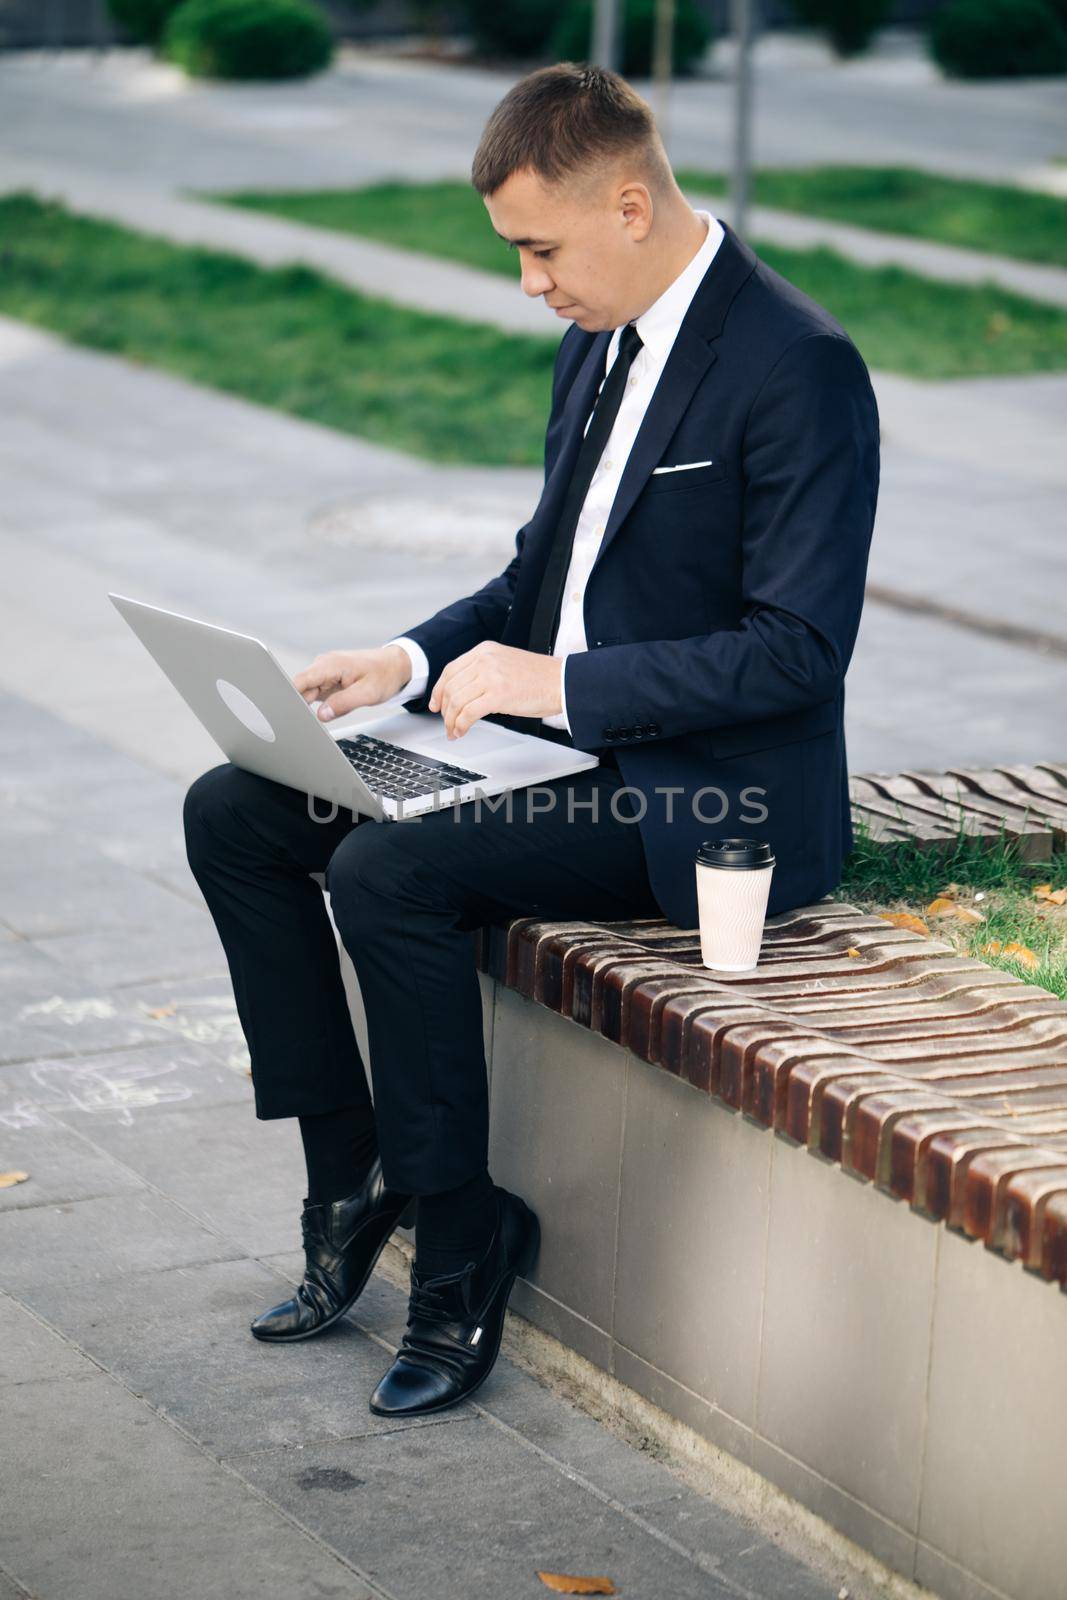 Distance working. Isolated man in a suit. Handsome young businessman sitting outdoors working with his laptop. Crisis 2020. Coronavirus outbreak.